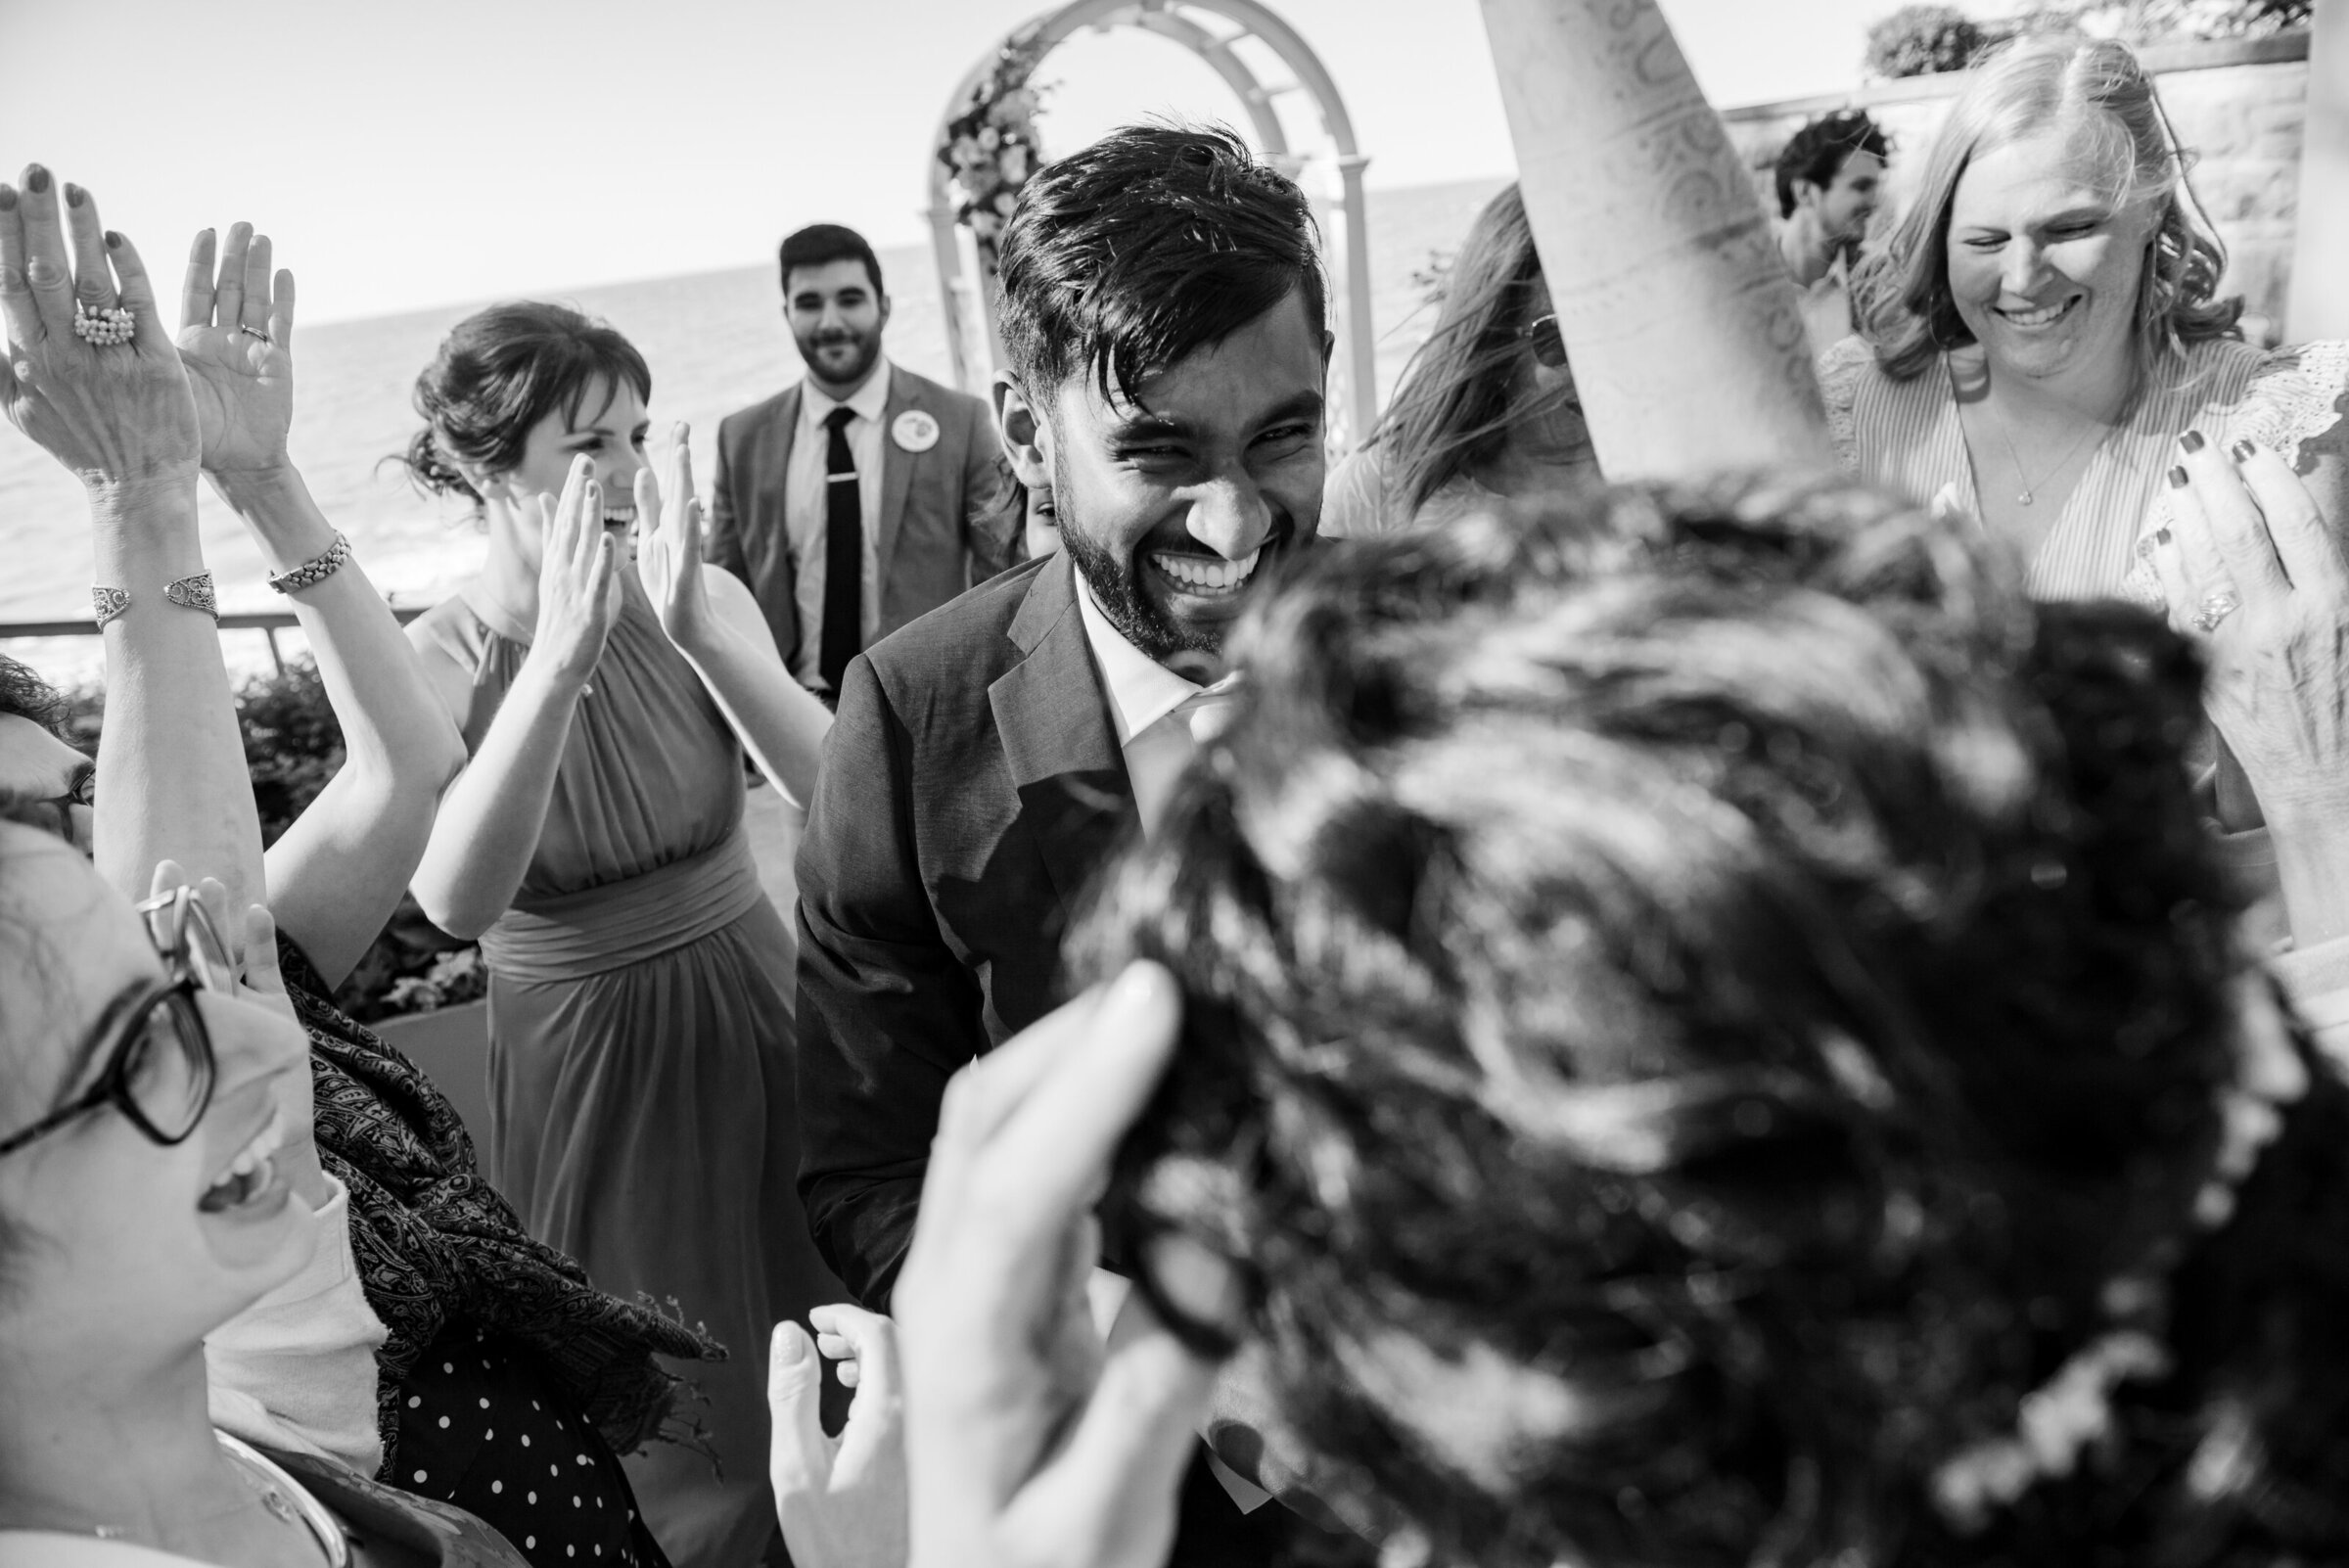 Ohio groom shares a dance with his bride on their wedding day, surrounding by all their friends and family during a private lakeside wedding in Rocky River, Ohio. Photo taken by Cleveland Wedding photographer Aaron Aldhizer